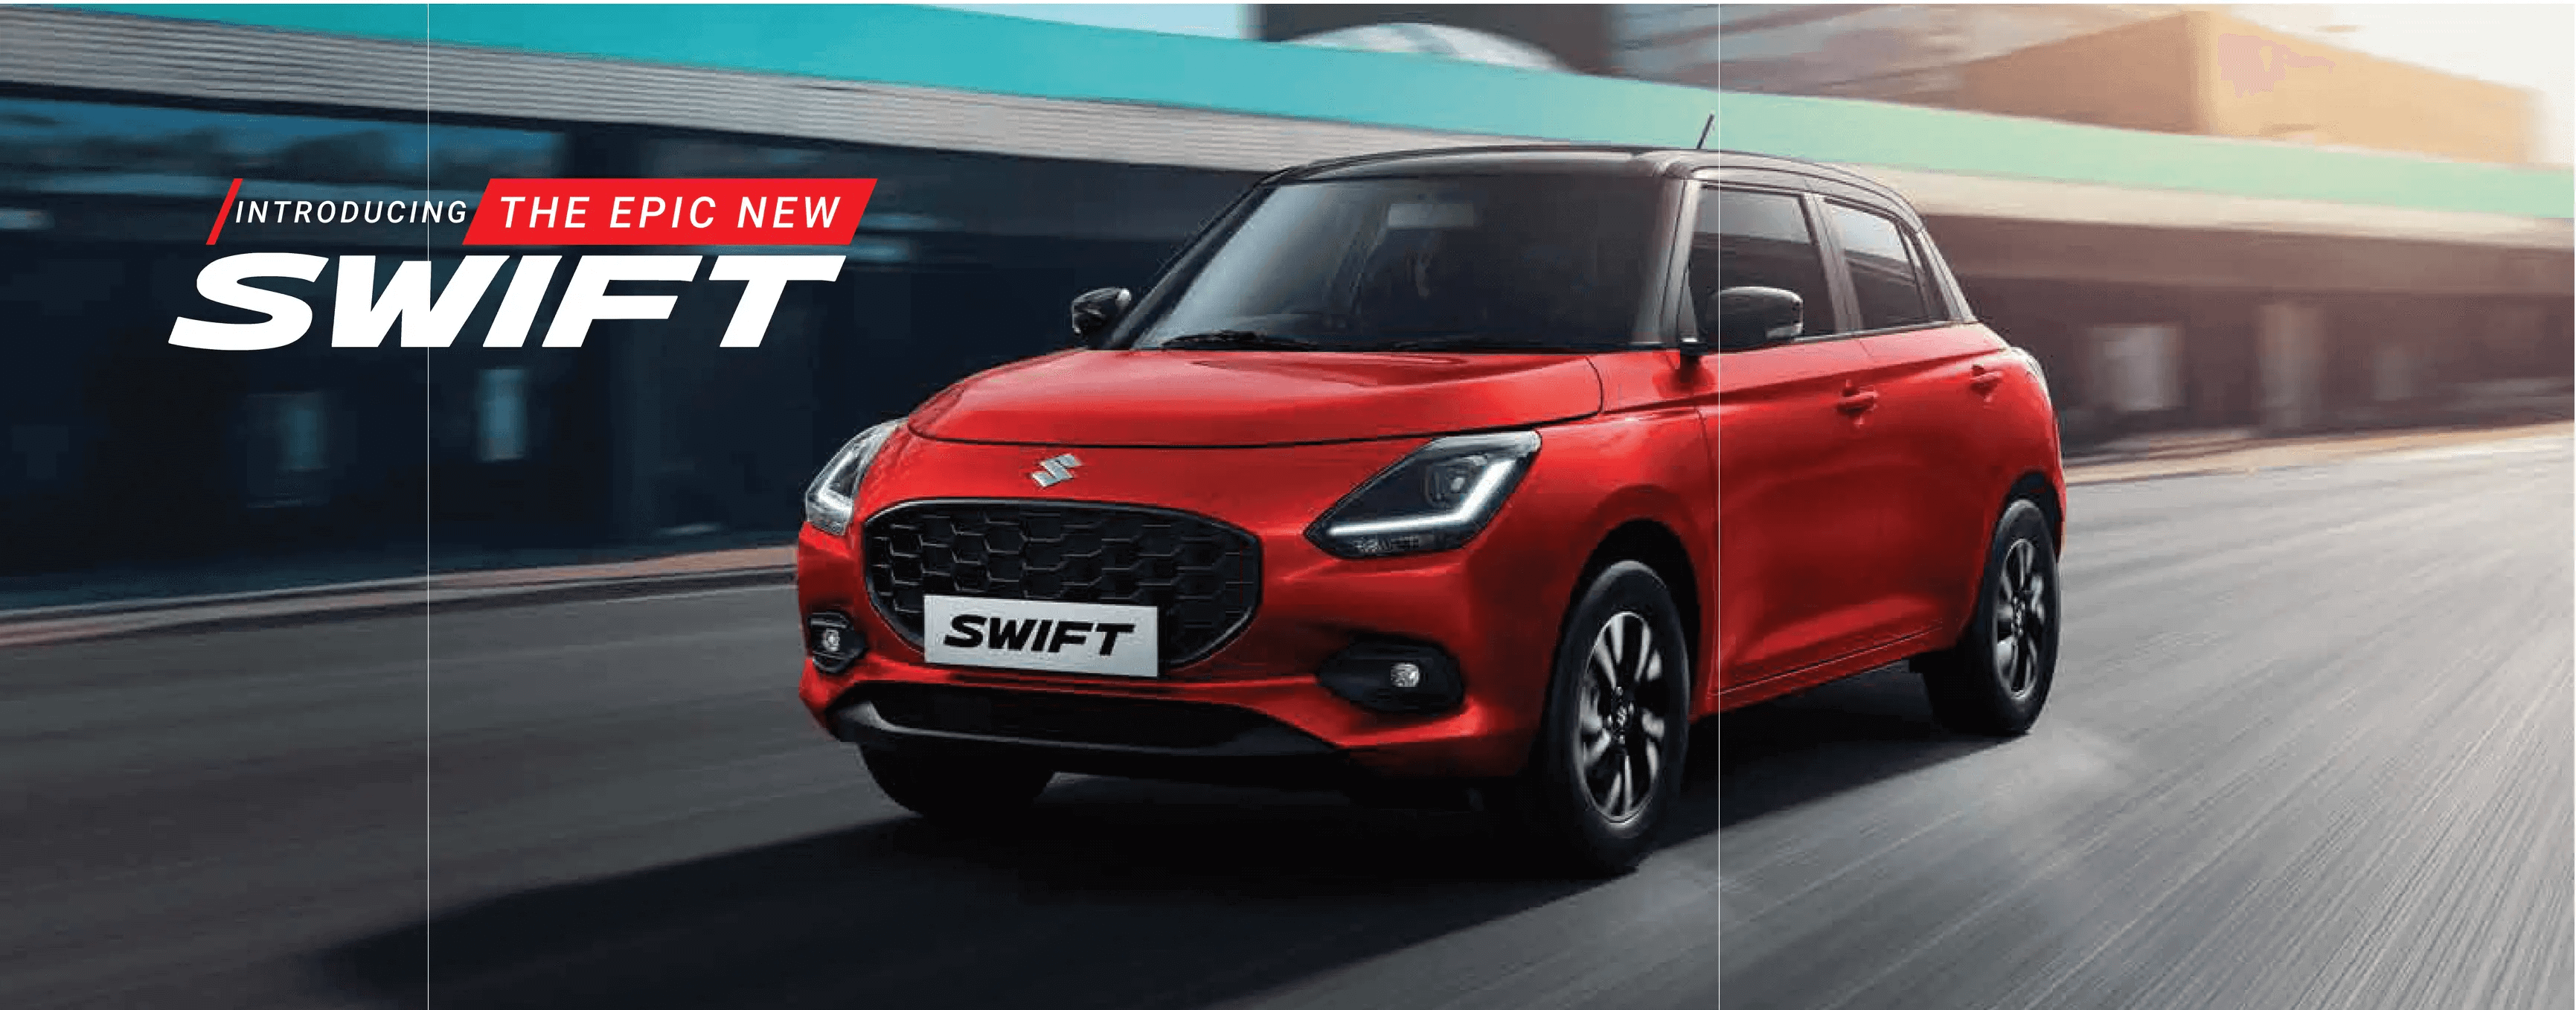 Image of a red Suzuki Swift car driving on a road. The background is blurred, indicating motion. The text on the image reads 'Introducing the Epic New Swift.'